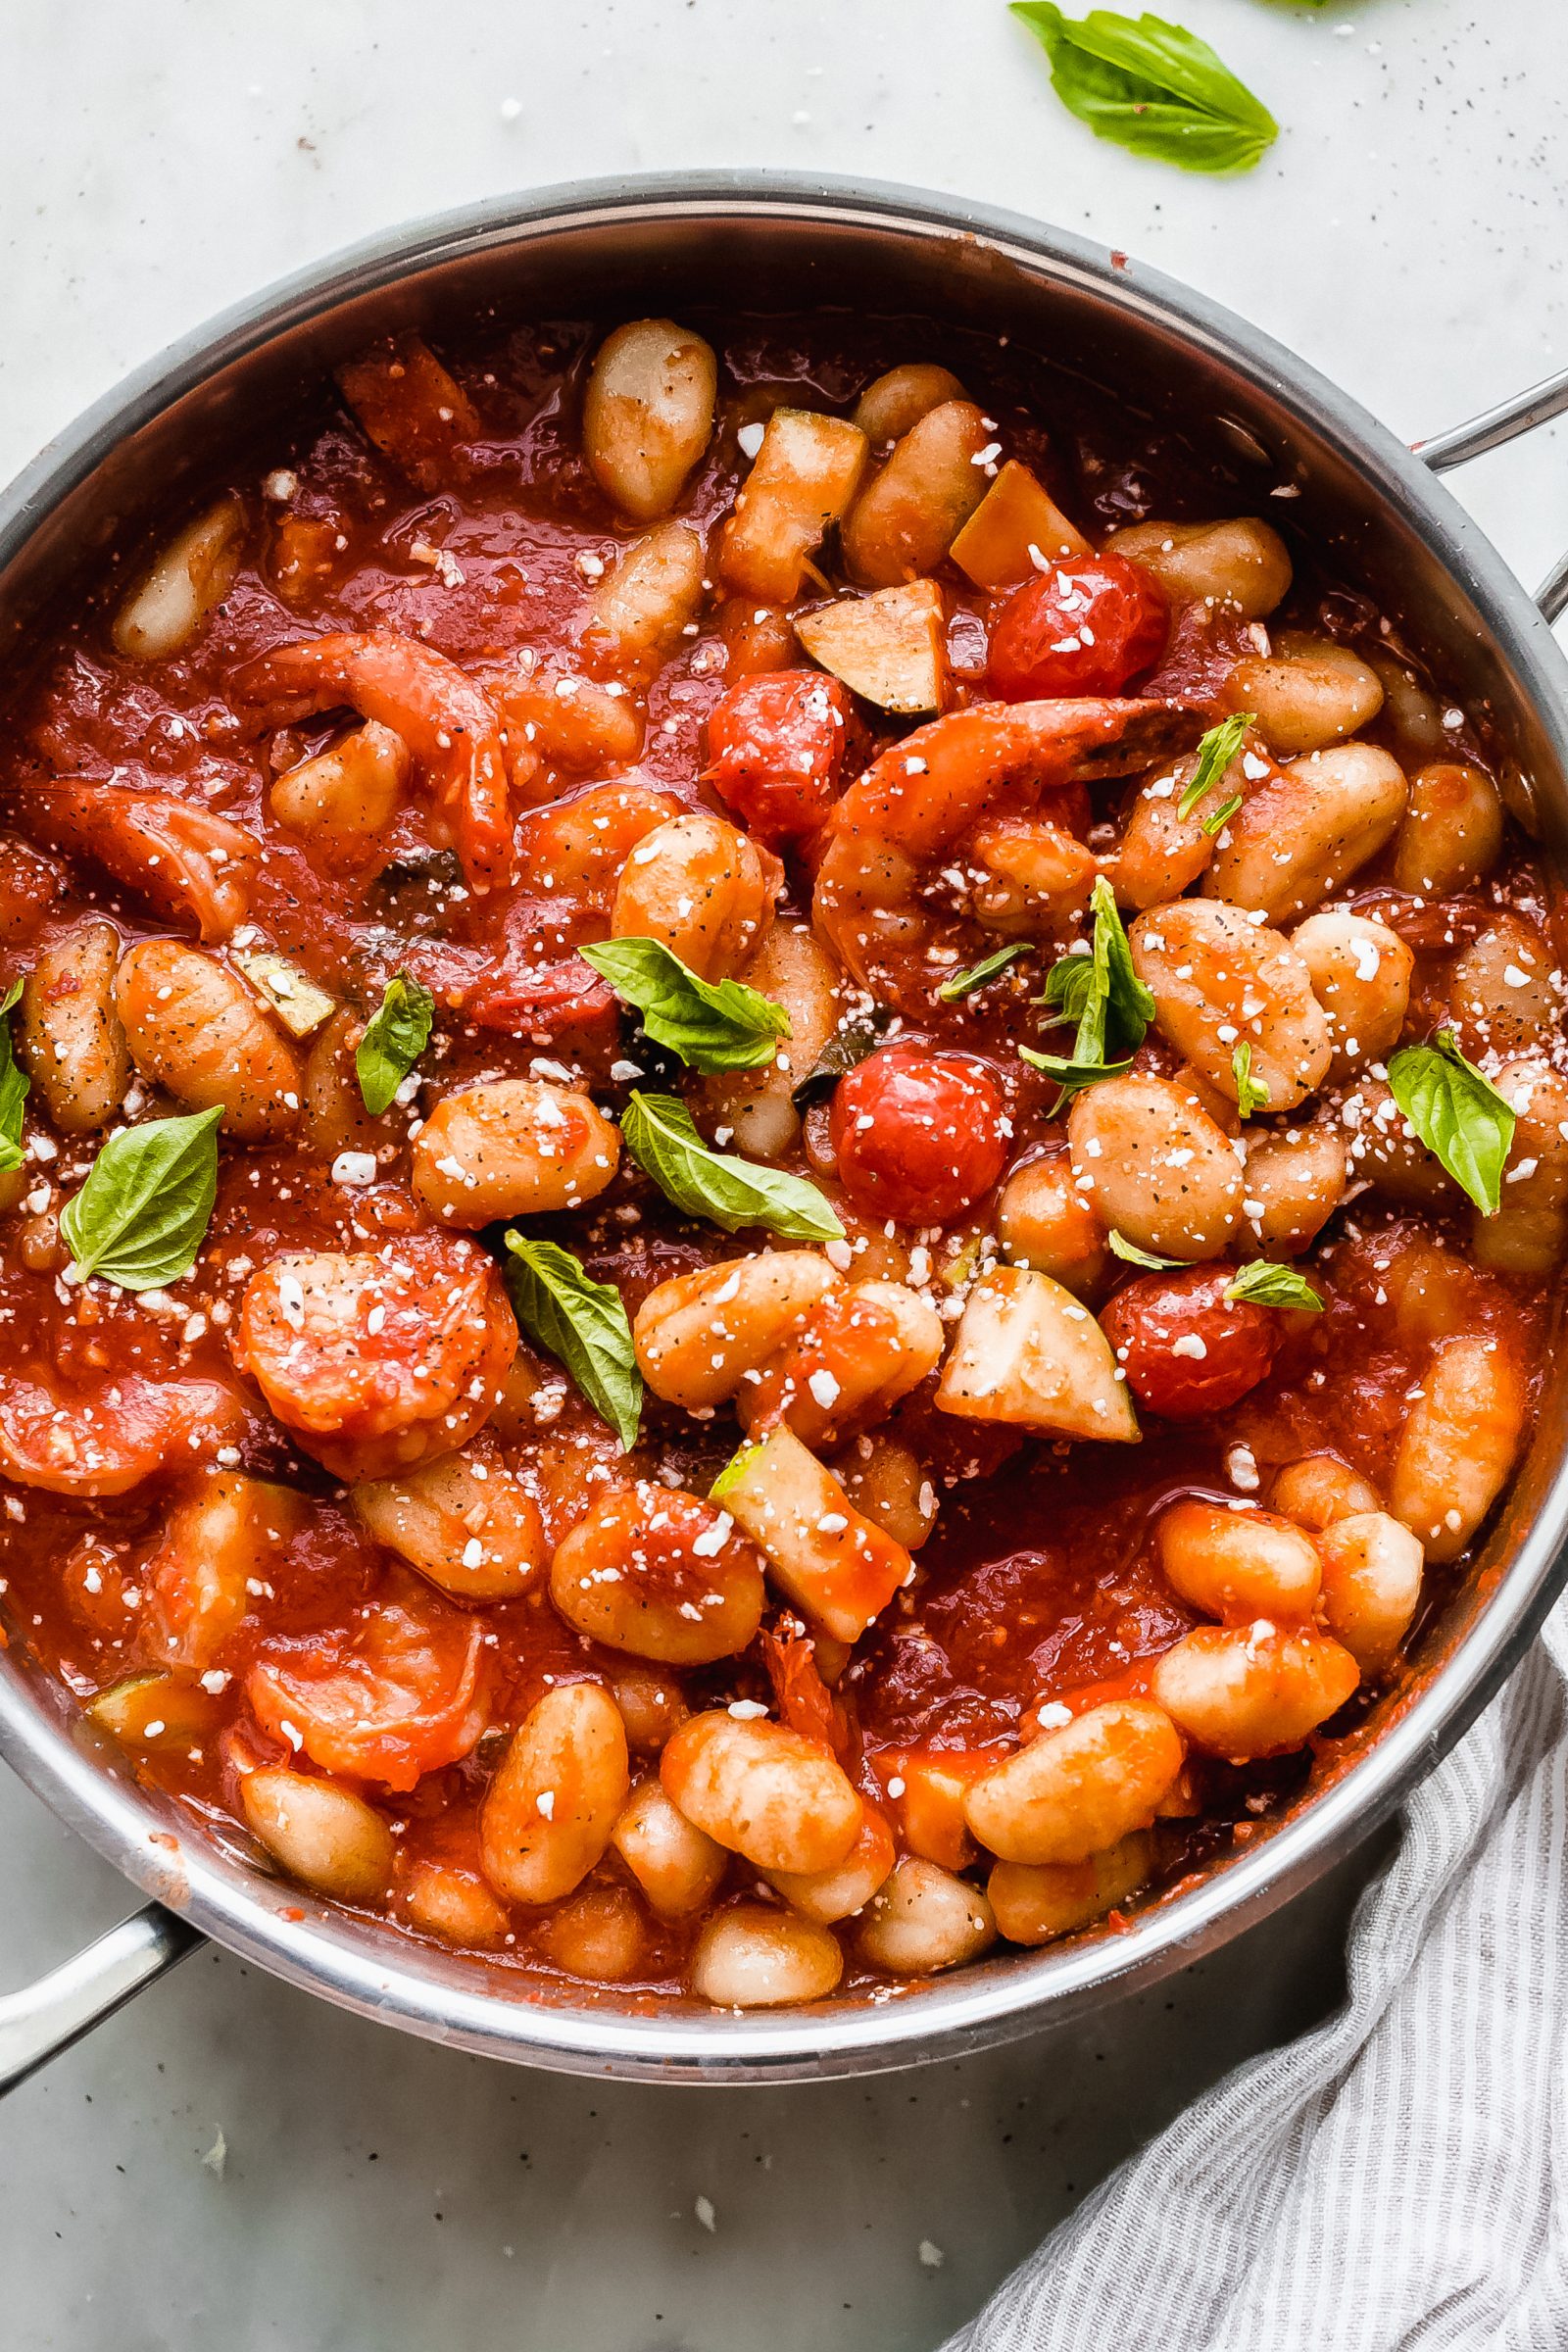 skillet with gnocchi in tomato sauce topped with basil